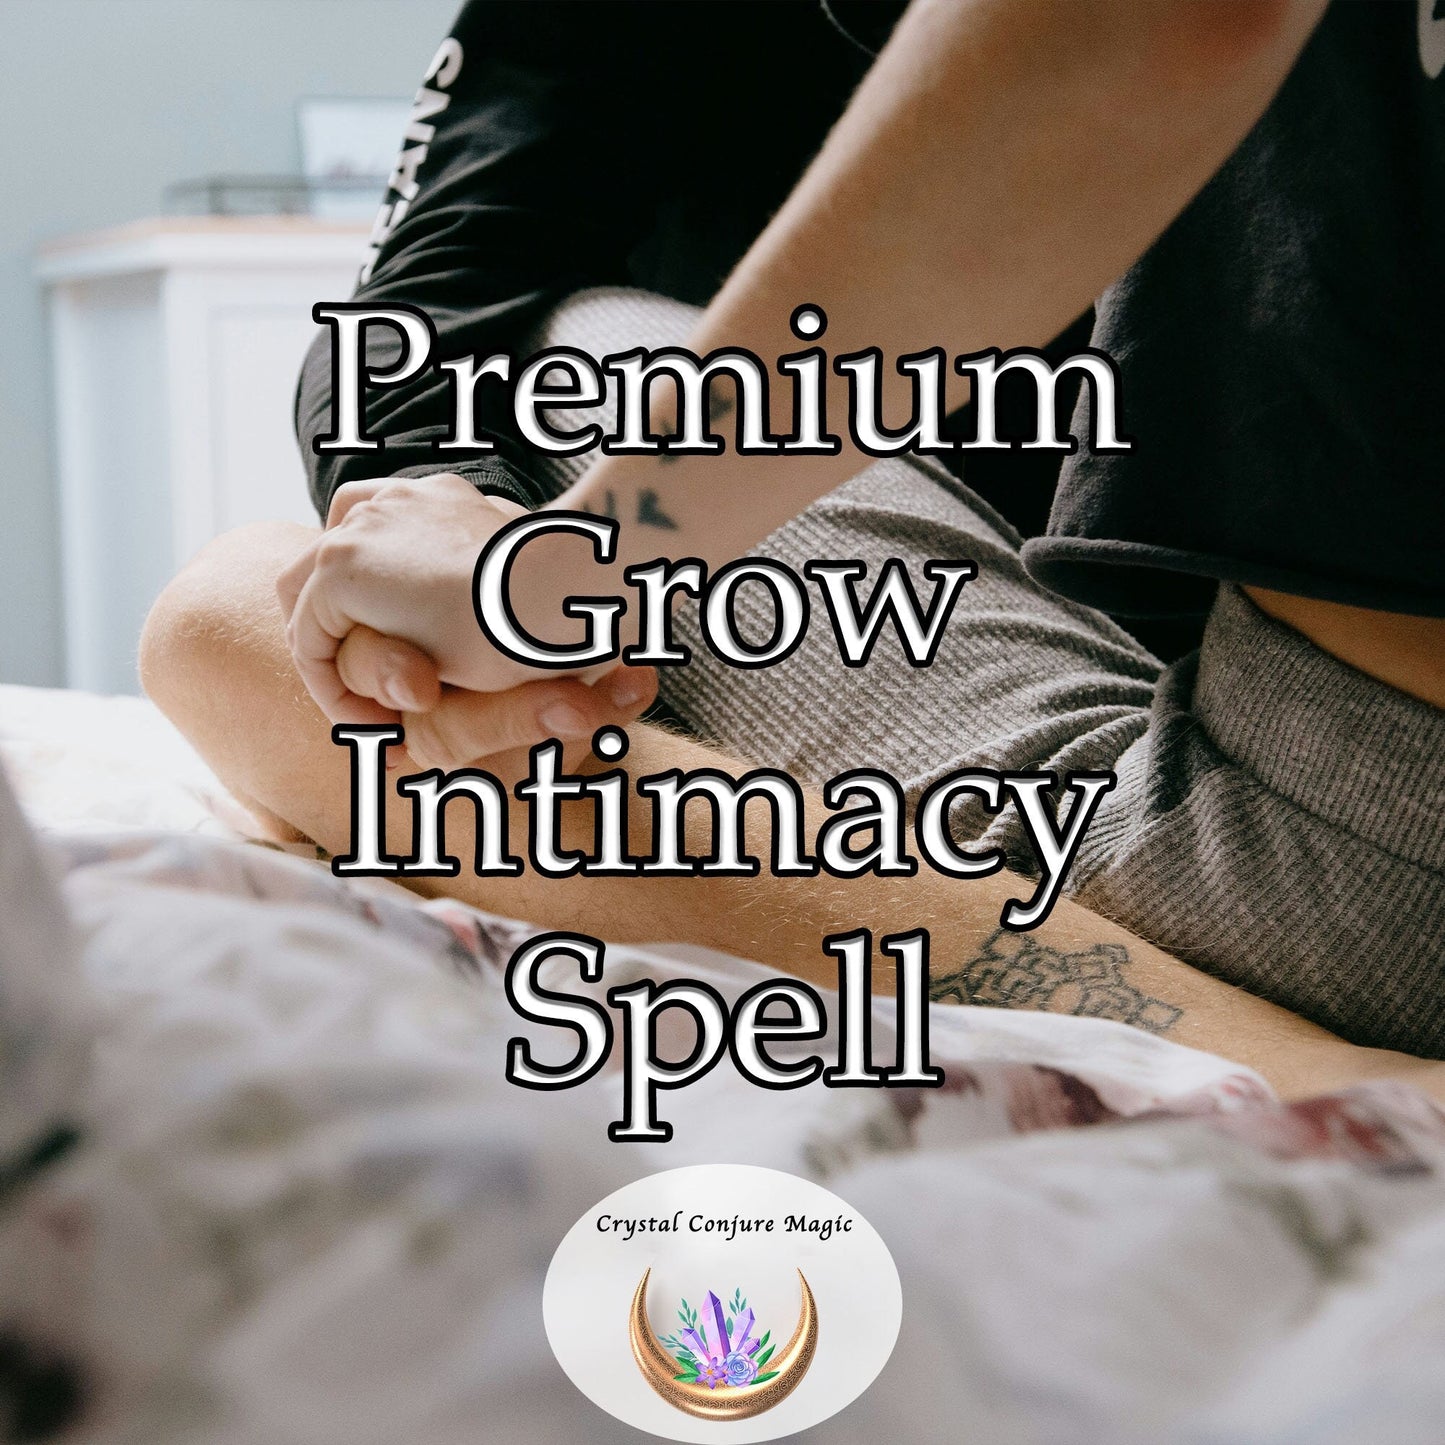 Premium Grow Intimacy Spell - barriers dissolve, communication flows effortlessly, and love blossoms